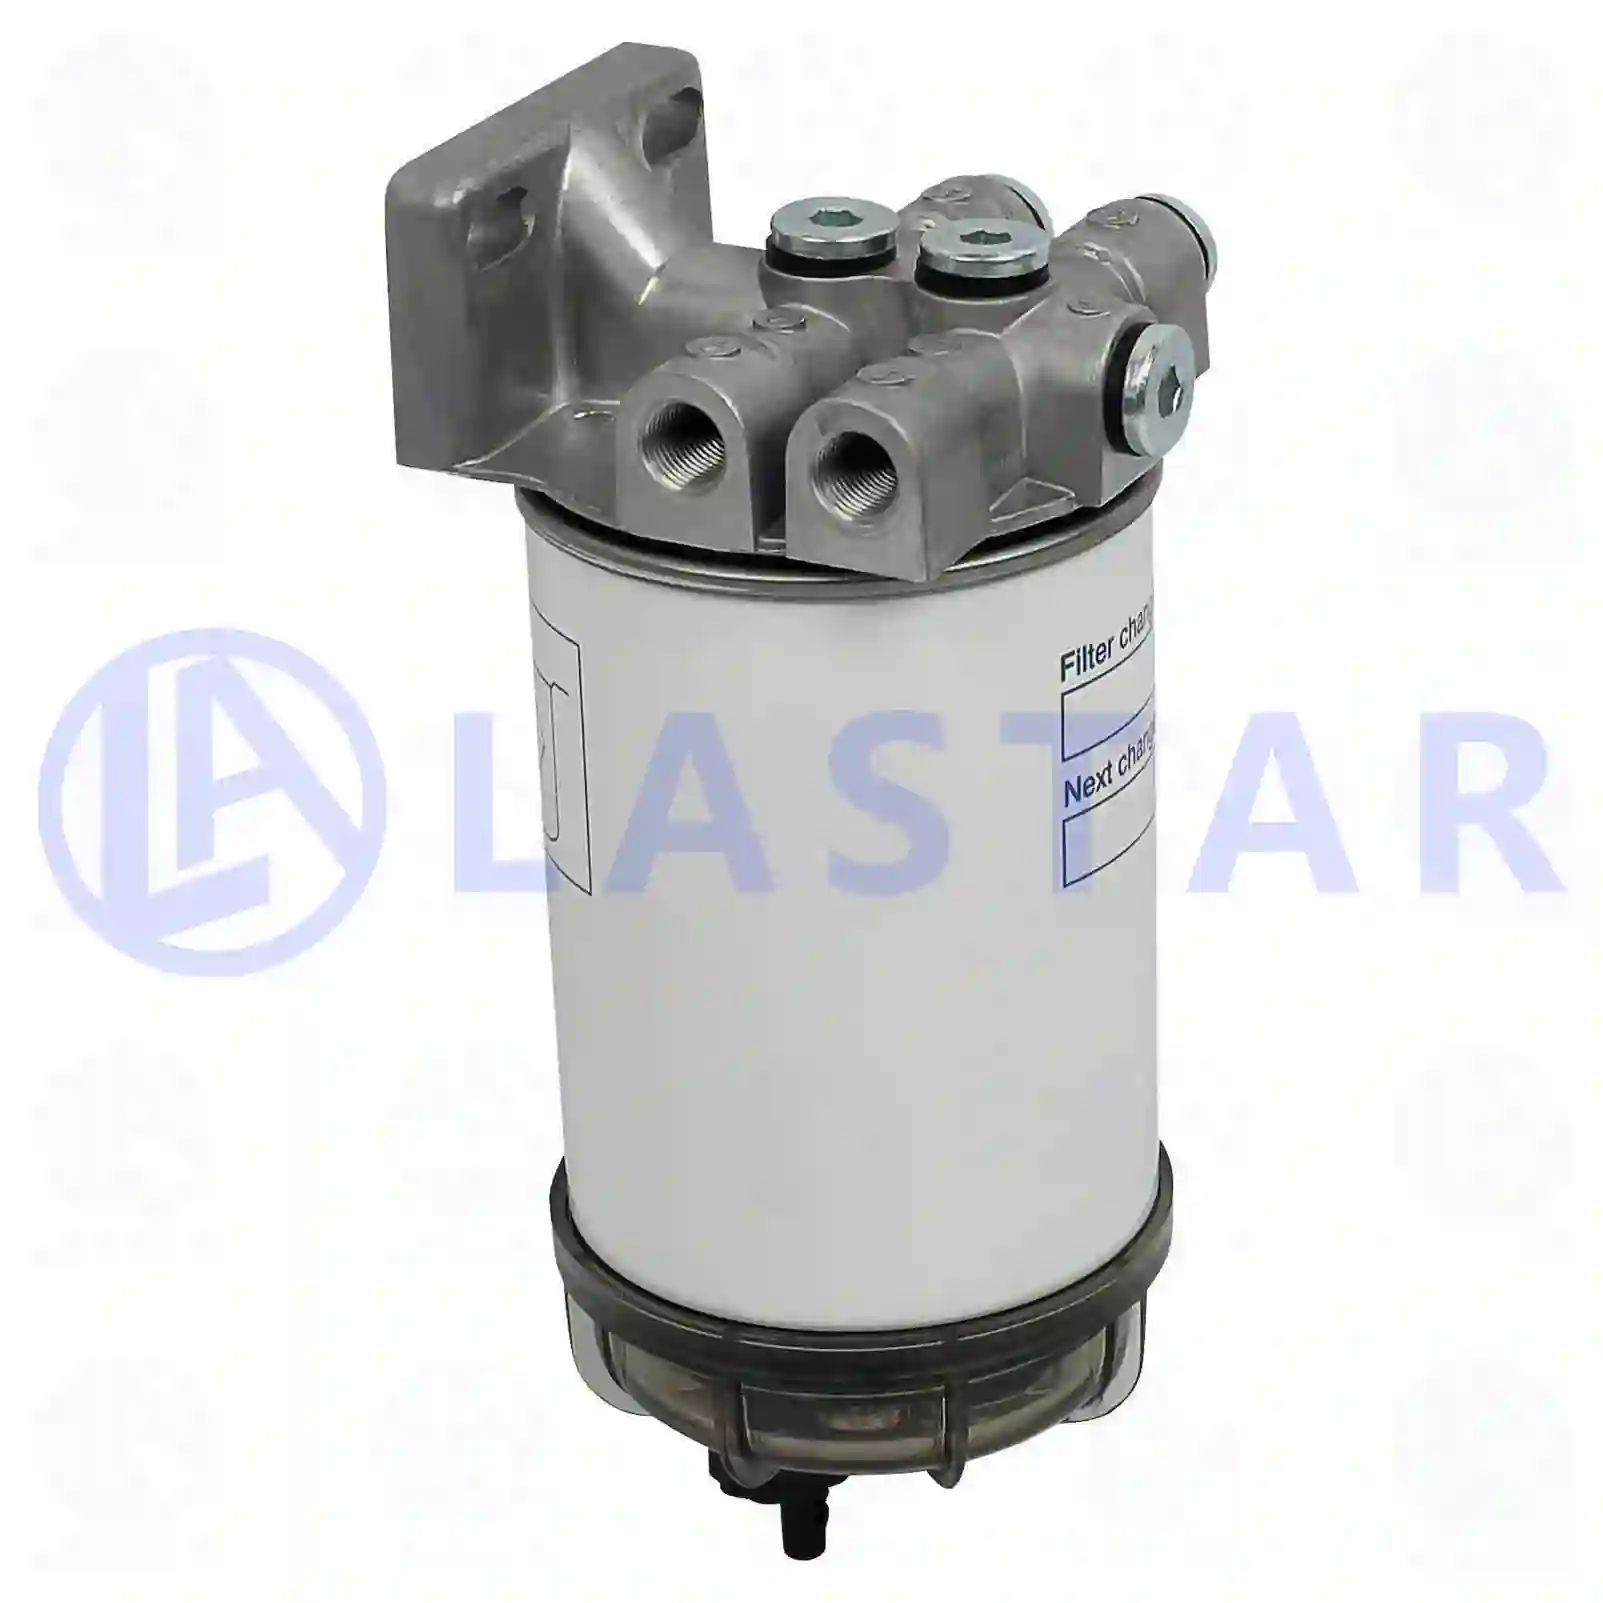 Fuel filter, water separator, complete, 77723957, 8159966, ZG10170-0008 ||  77723957 Lastar Spare Part | Truck Spare Parts, Auotomotive Spare Parts Fuel filter, water separator, complete, 77723957, 8159966, ZG10170-0008 ||  77723957 Lastar Spare Part | Truck Spare Parts, Auotomotive Spare Parts